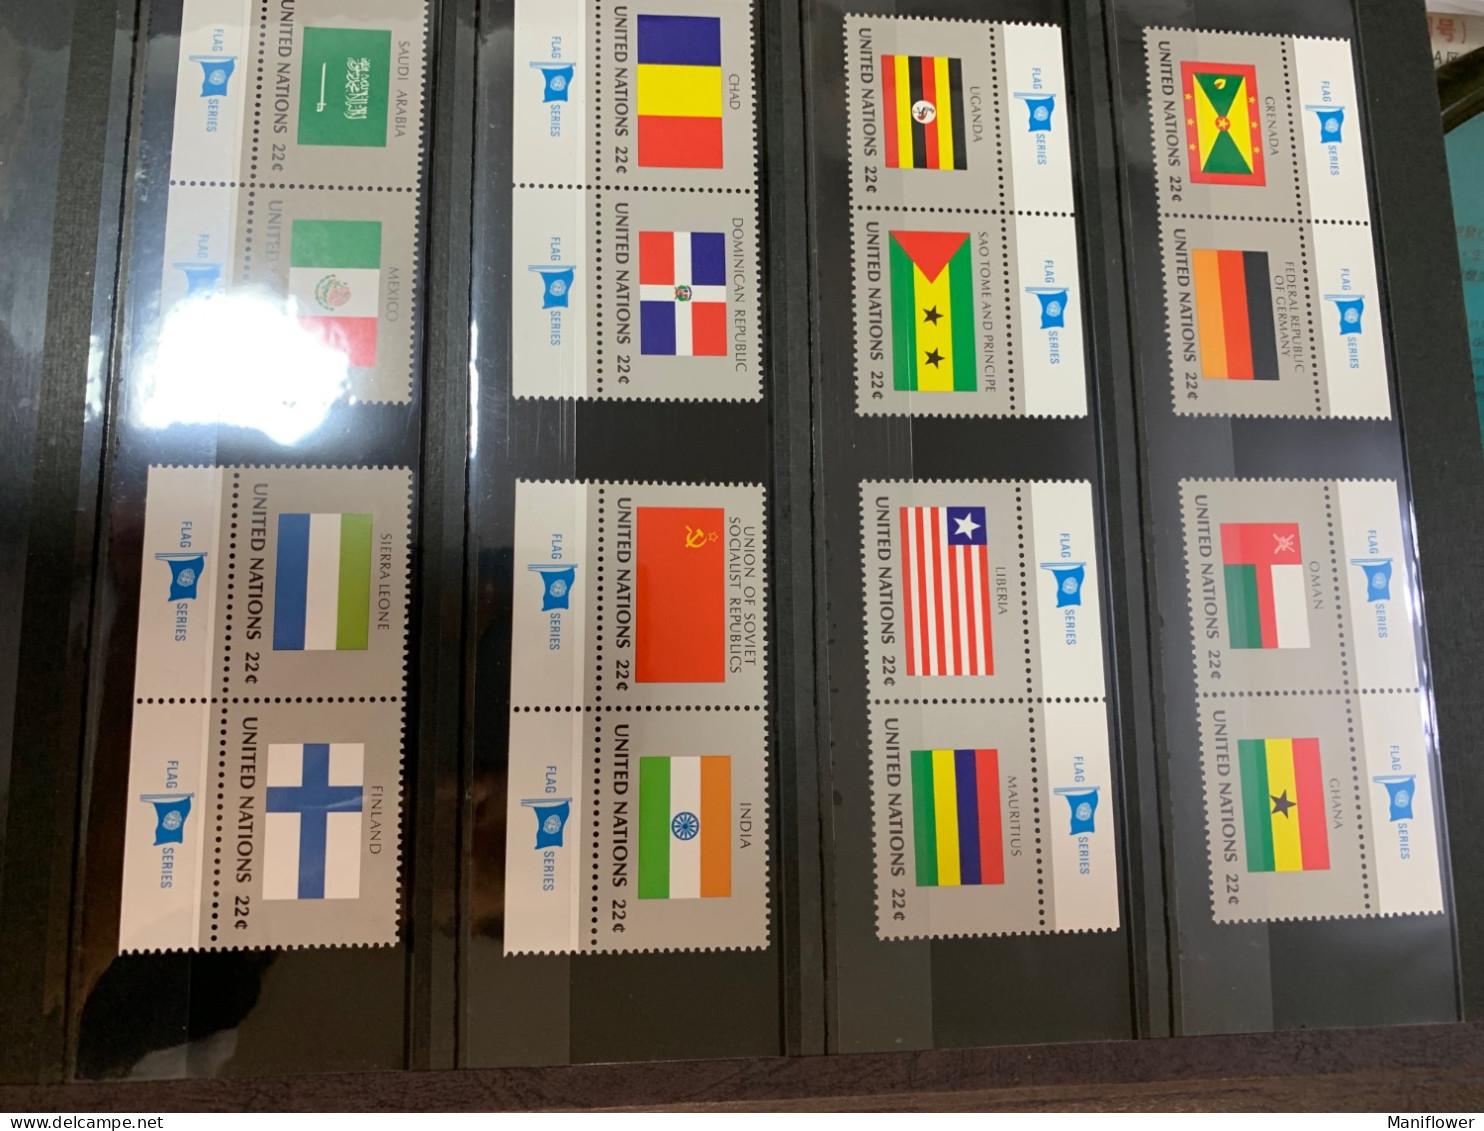 UN stamp flags collection MNH 7 pages sets in book